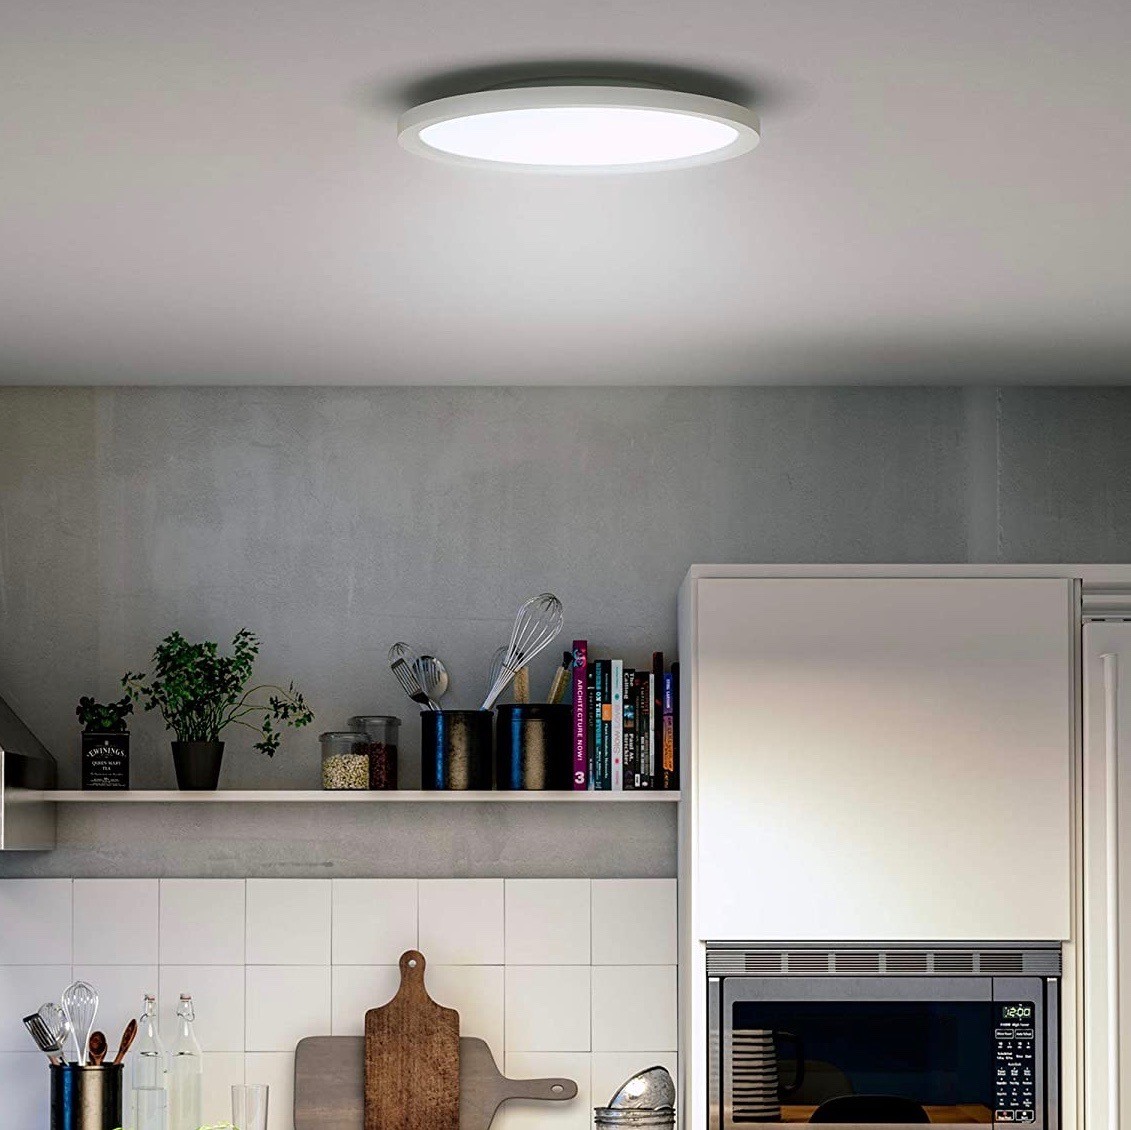 197,95 € Free Shipping | Indoor ceiling light Philips 24W 45×44 cm. LED. Alexa and Google Home Aluminum and pmma. White Color